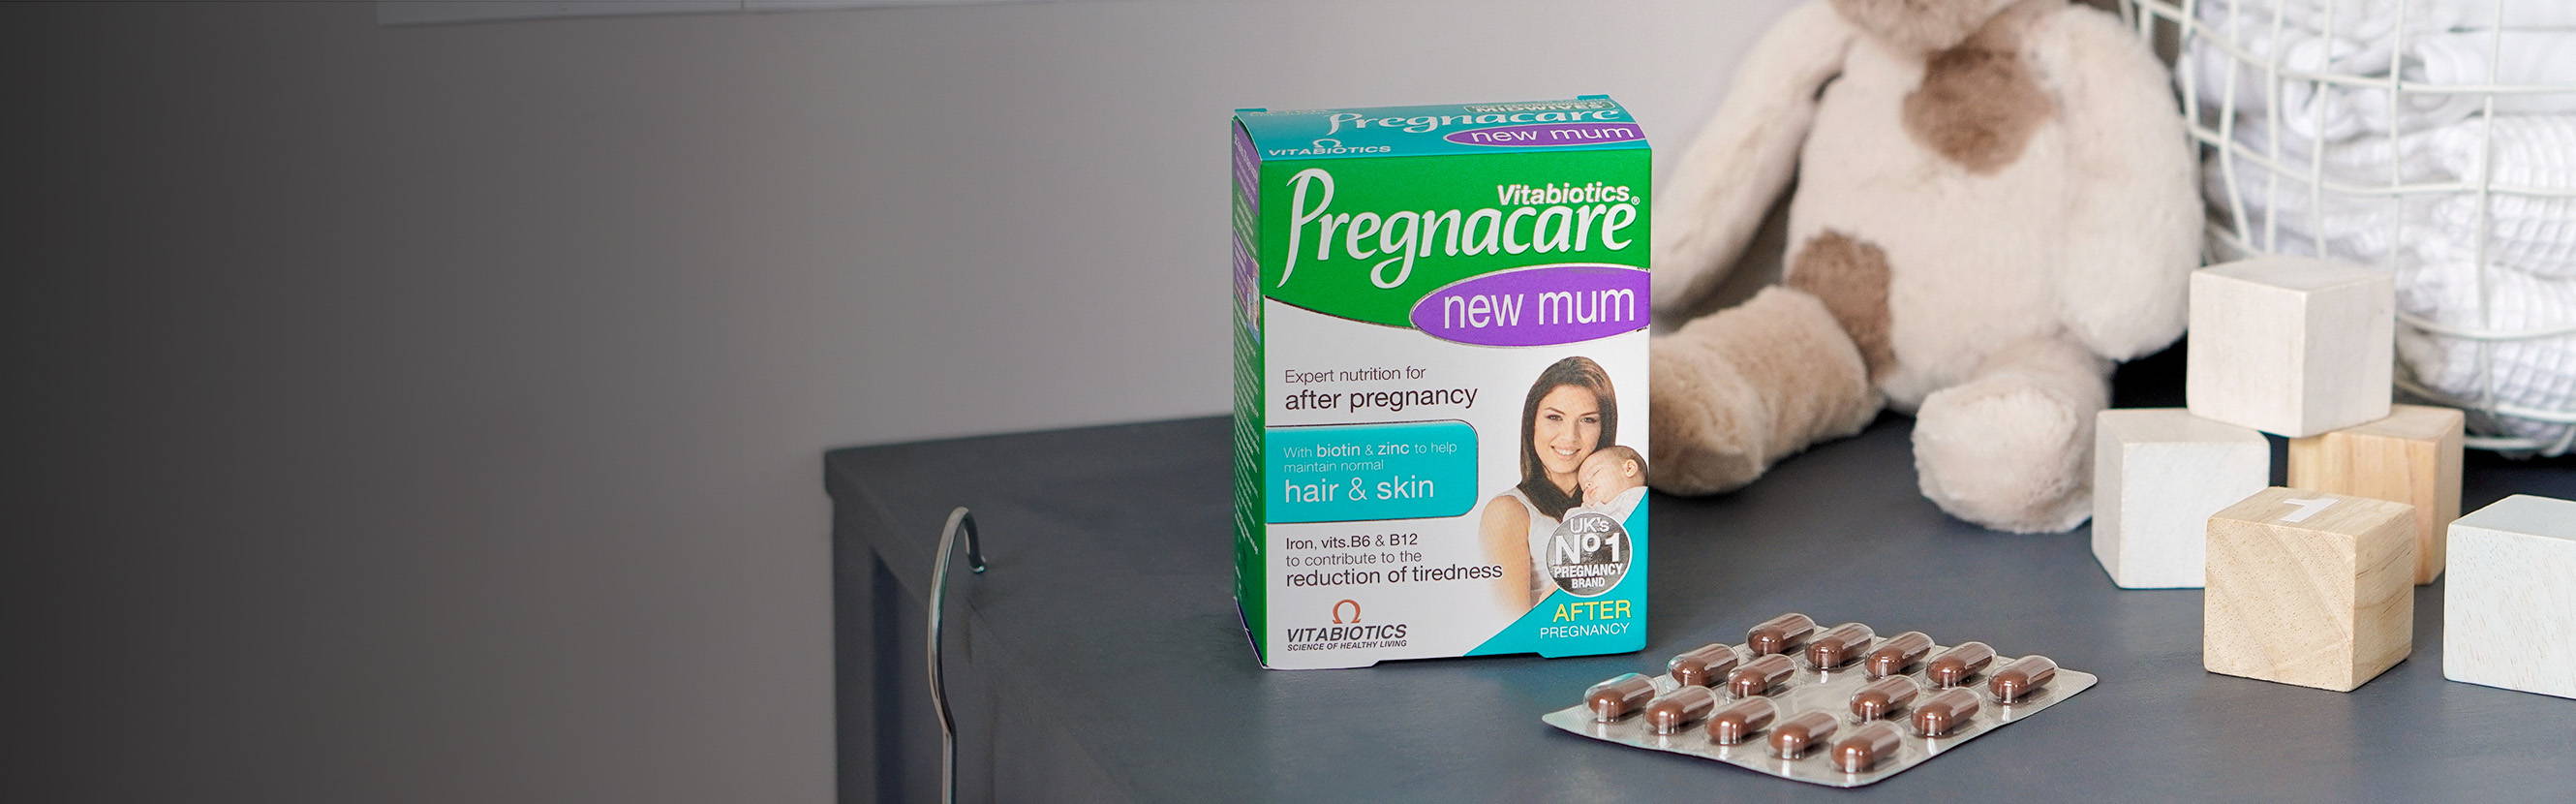  Being a new mum is exciting and exhausting at the same time. And with a little one to look after, taking care of your own health is more important than ever. Pregnacare New Mum is gently formulated based on how your body changes after pregnancy and childbirth, with specific nutrients to help maintain normal energy release, skin health and hair health. 